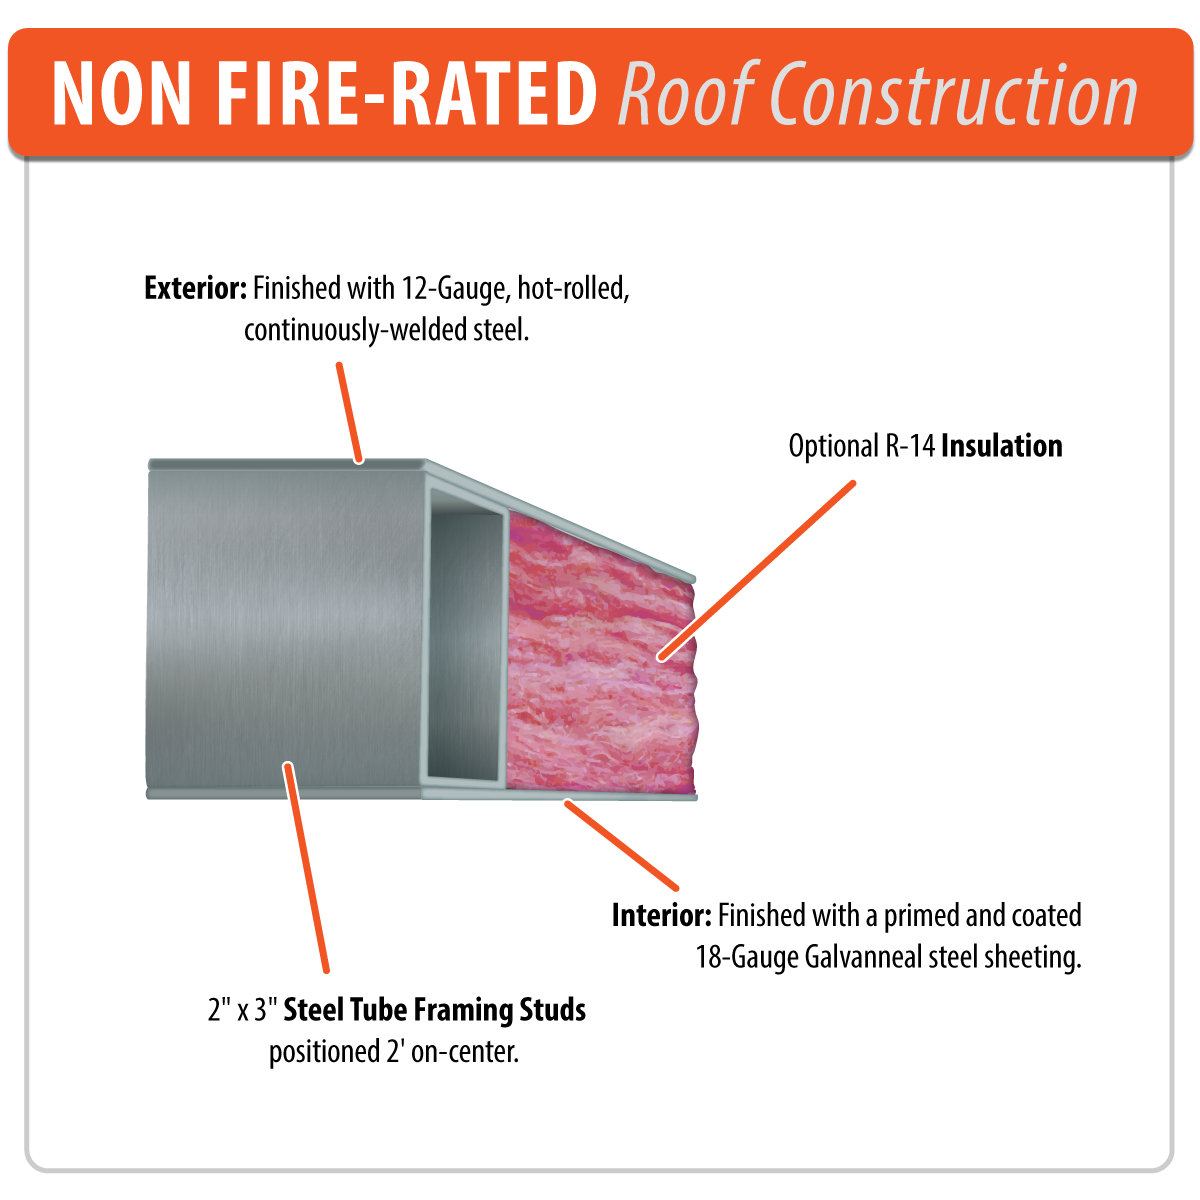 Non Fire-Rated Roof Construction Feature